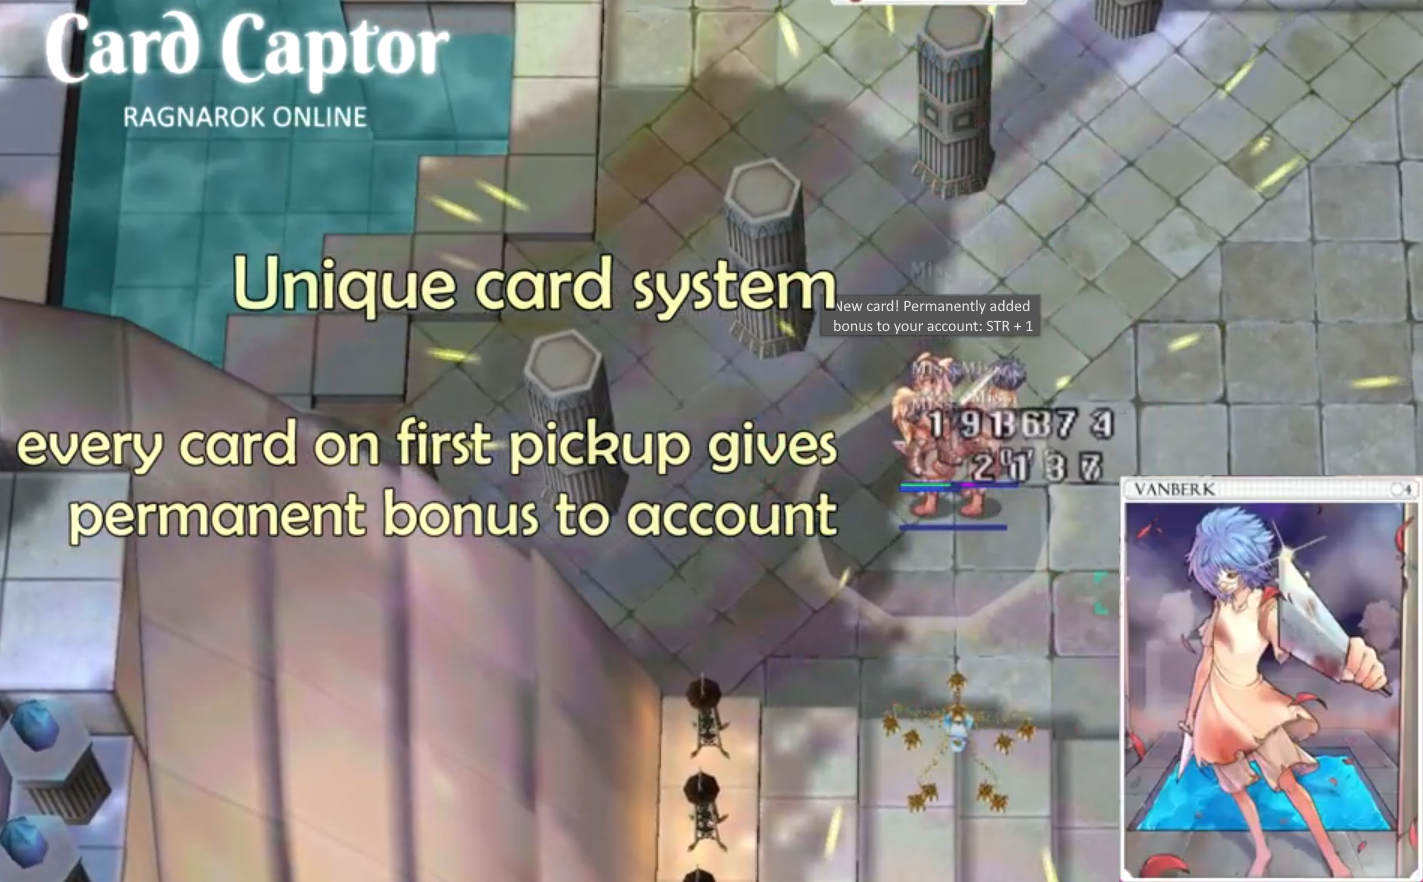 All cards give permanent account bonus